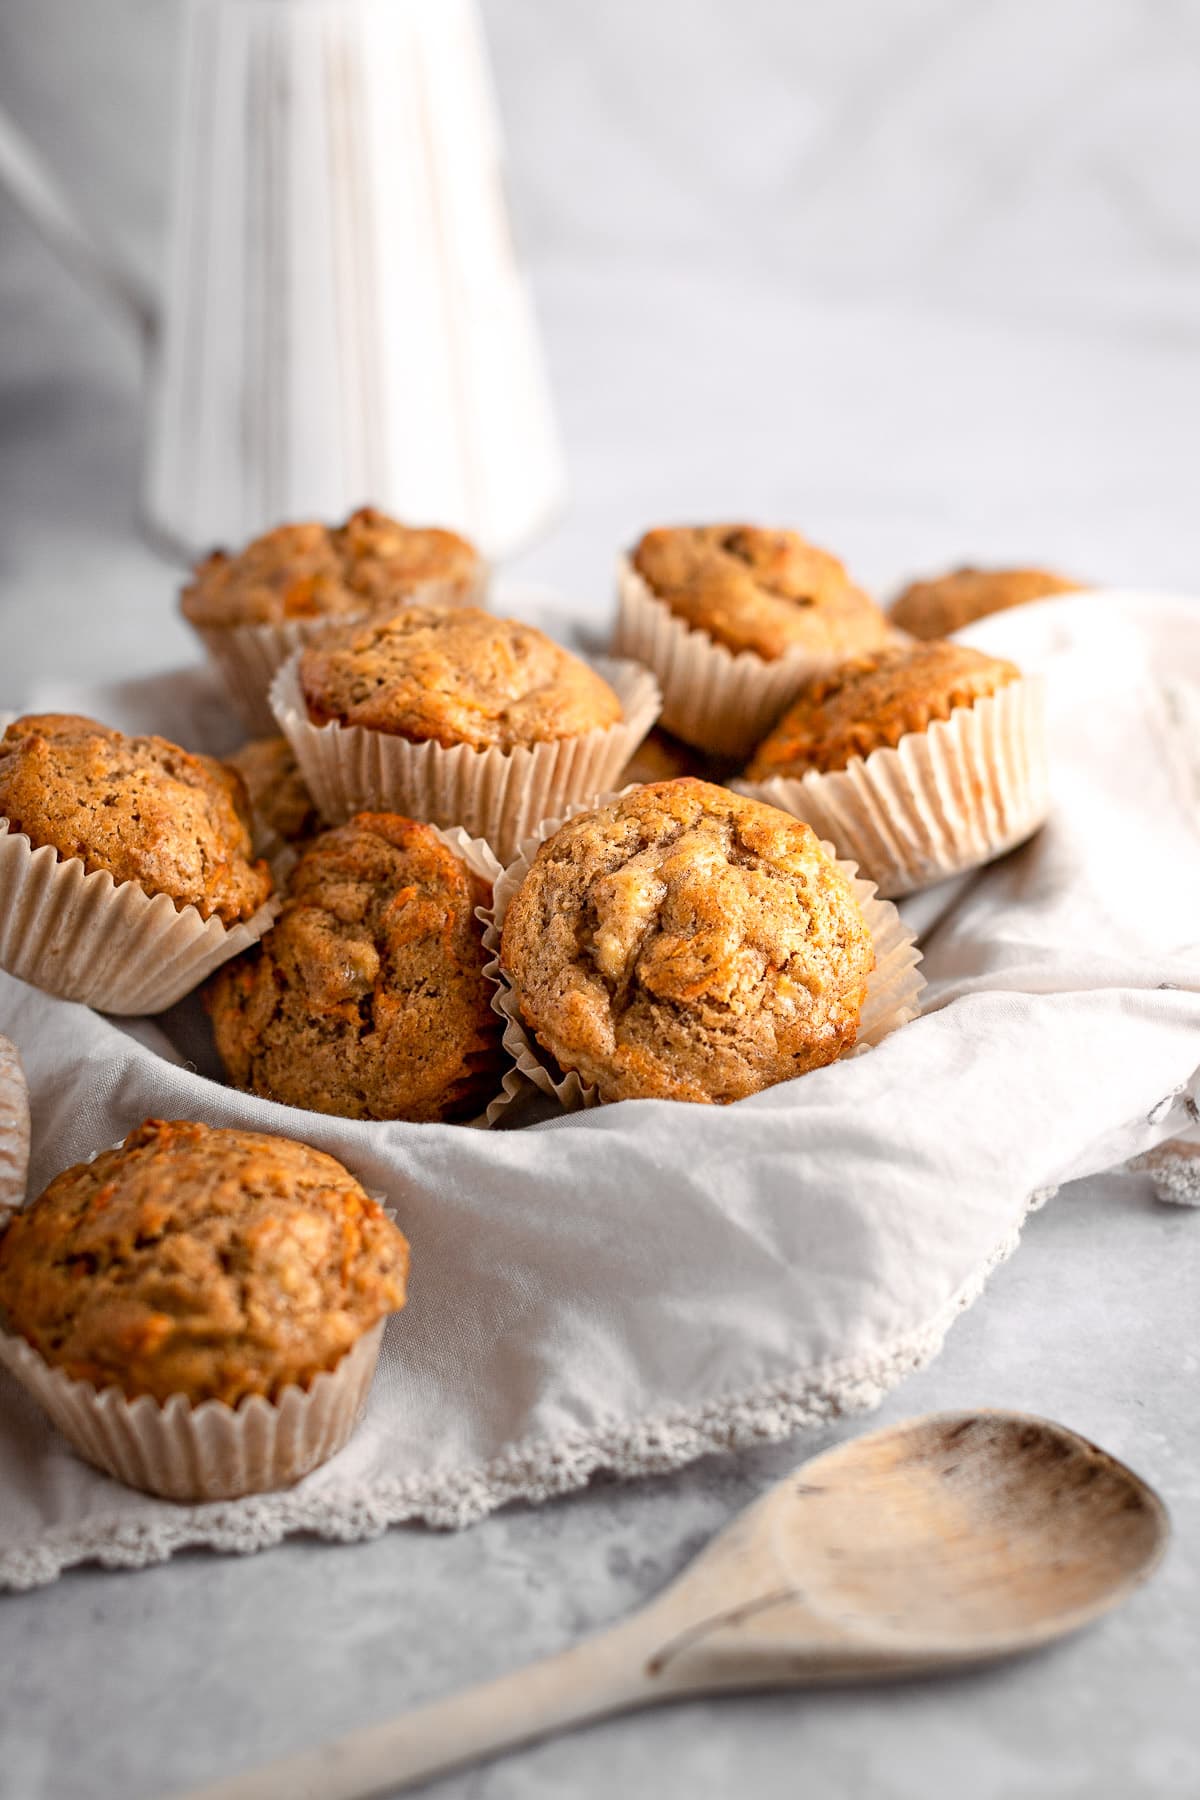 A basket filled with banana carrot muffins, sitting on a light grey table.